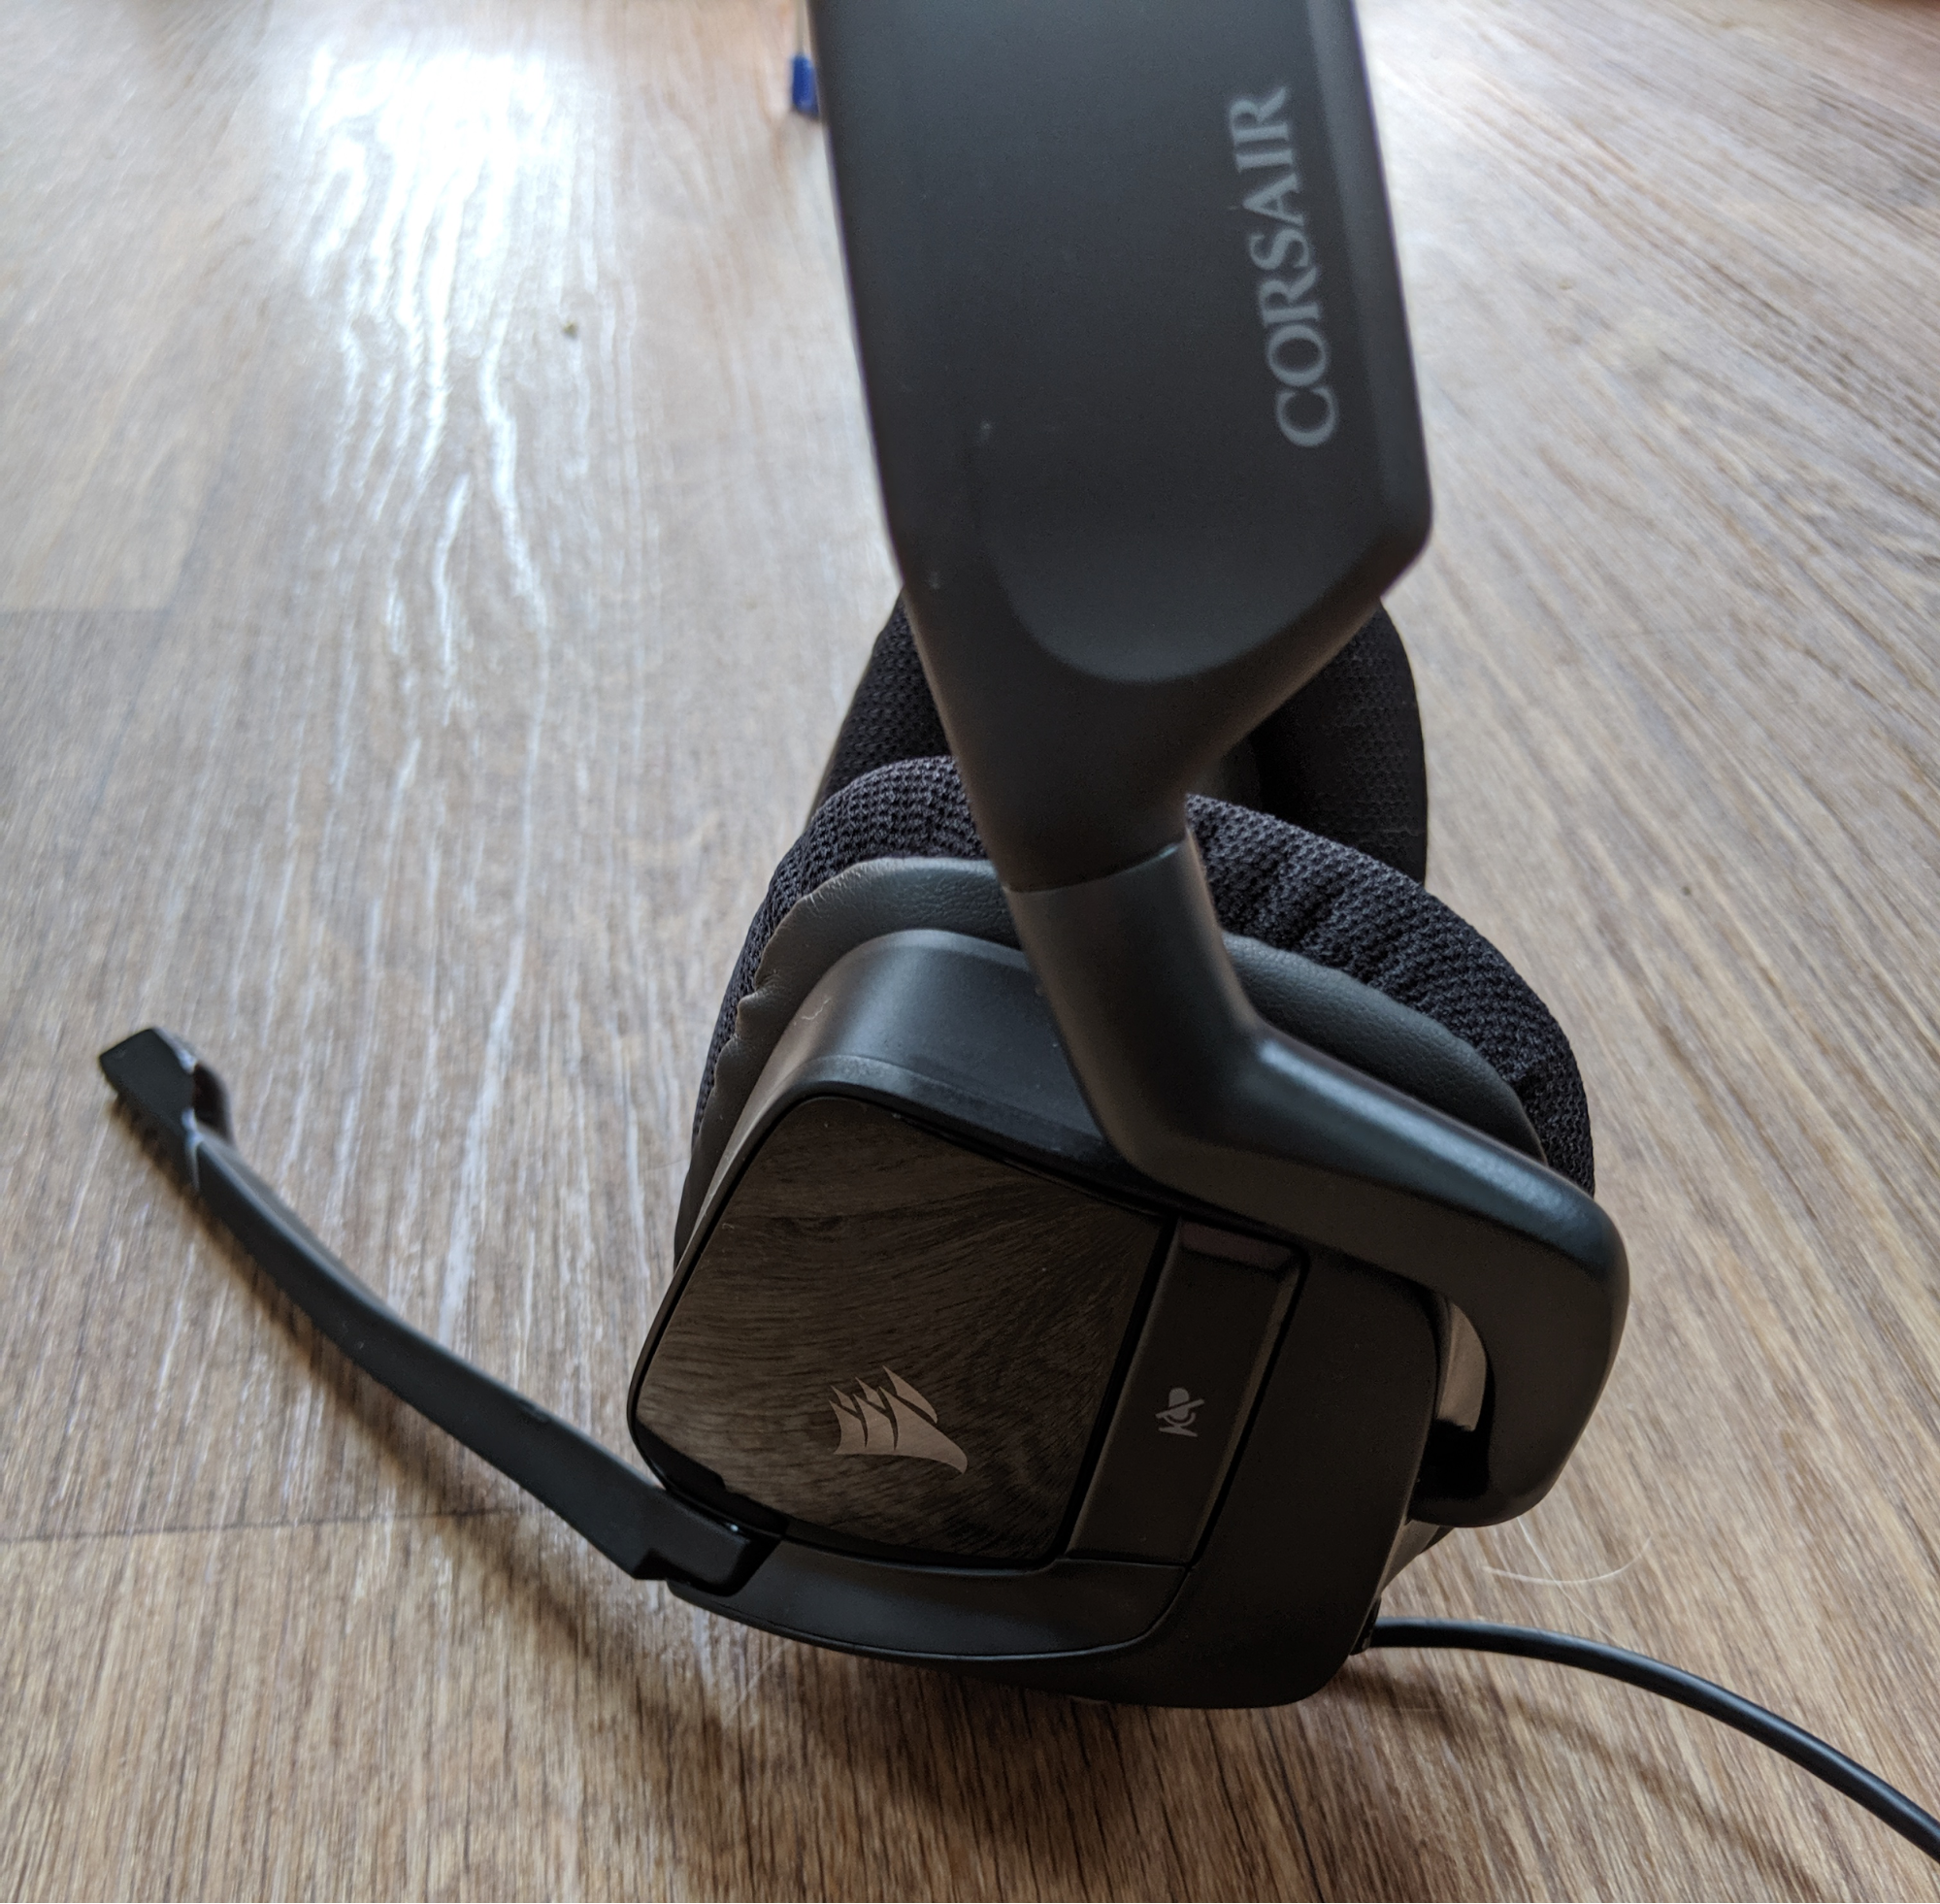 Association puls Turist Corsair Void RGB Elite USB Gaming Headset Review: A Mic to Be Reckoned With  | Tom's Hardware